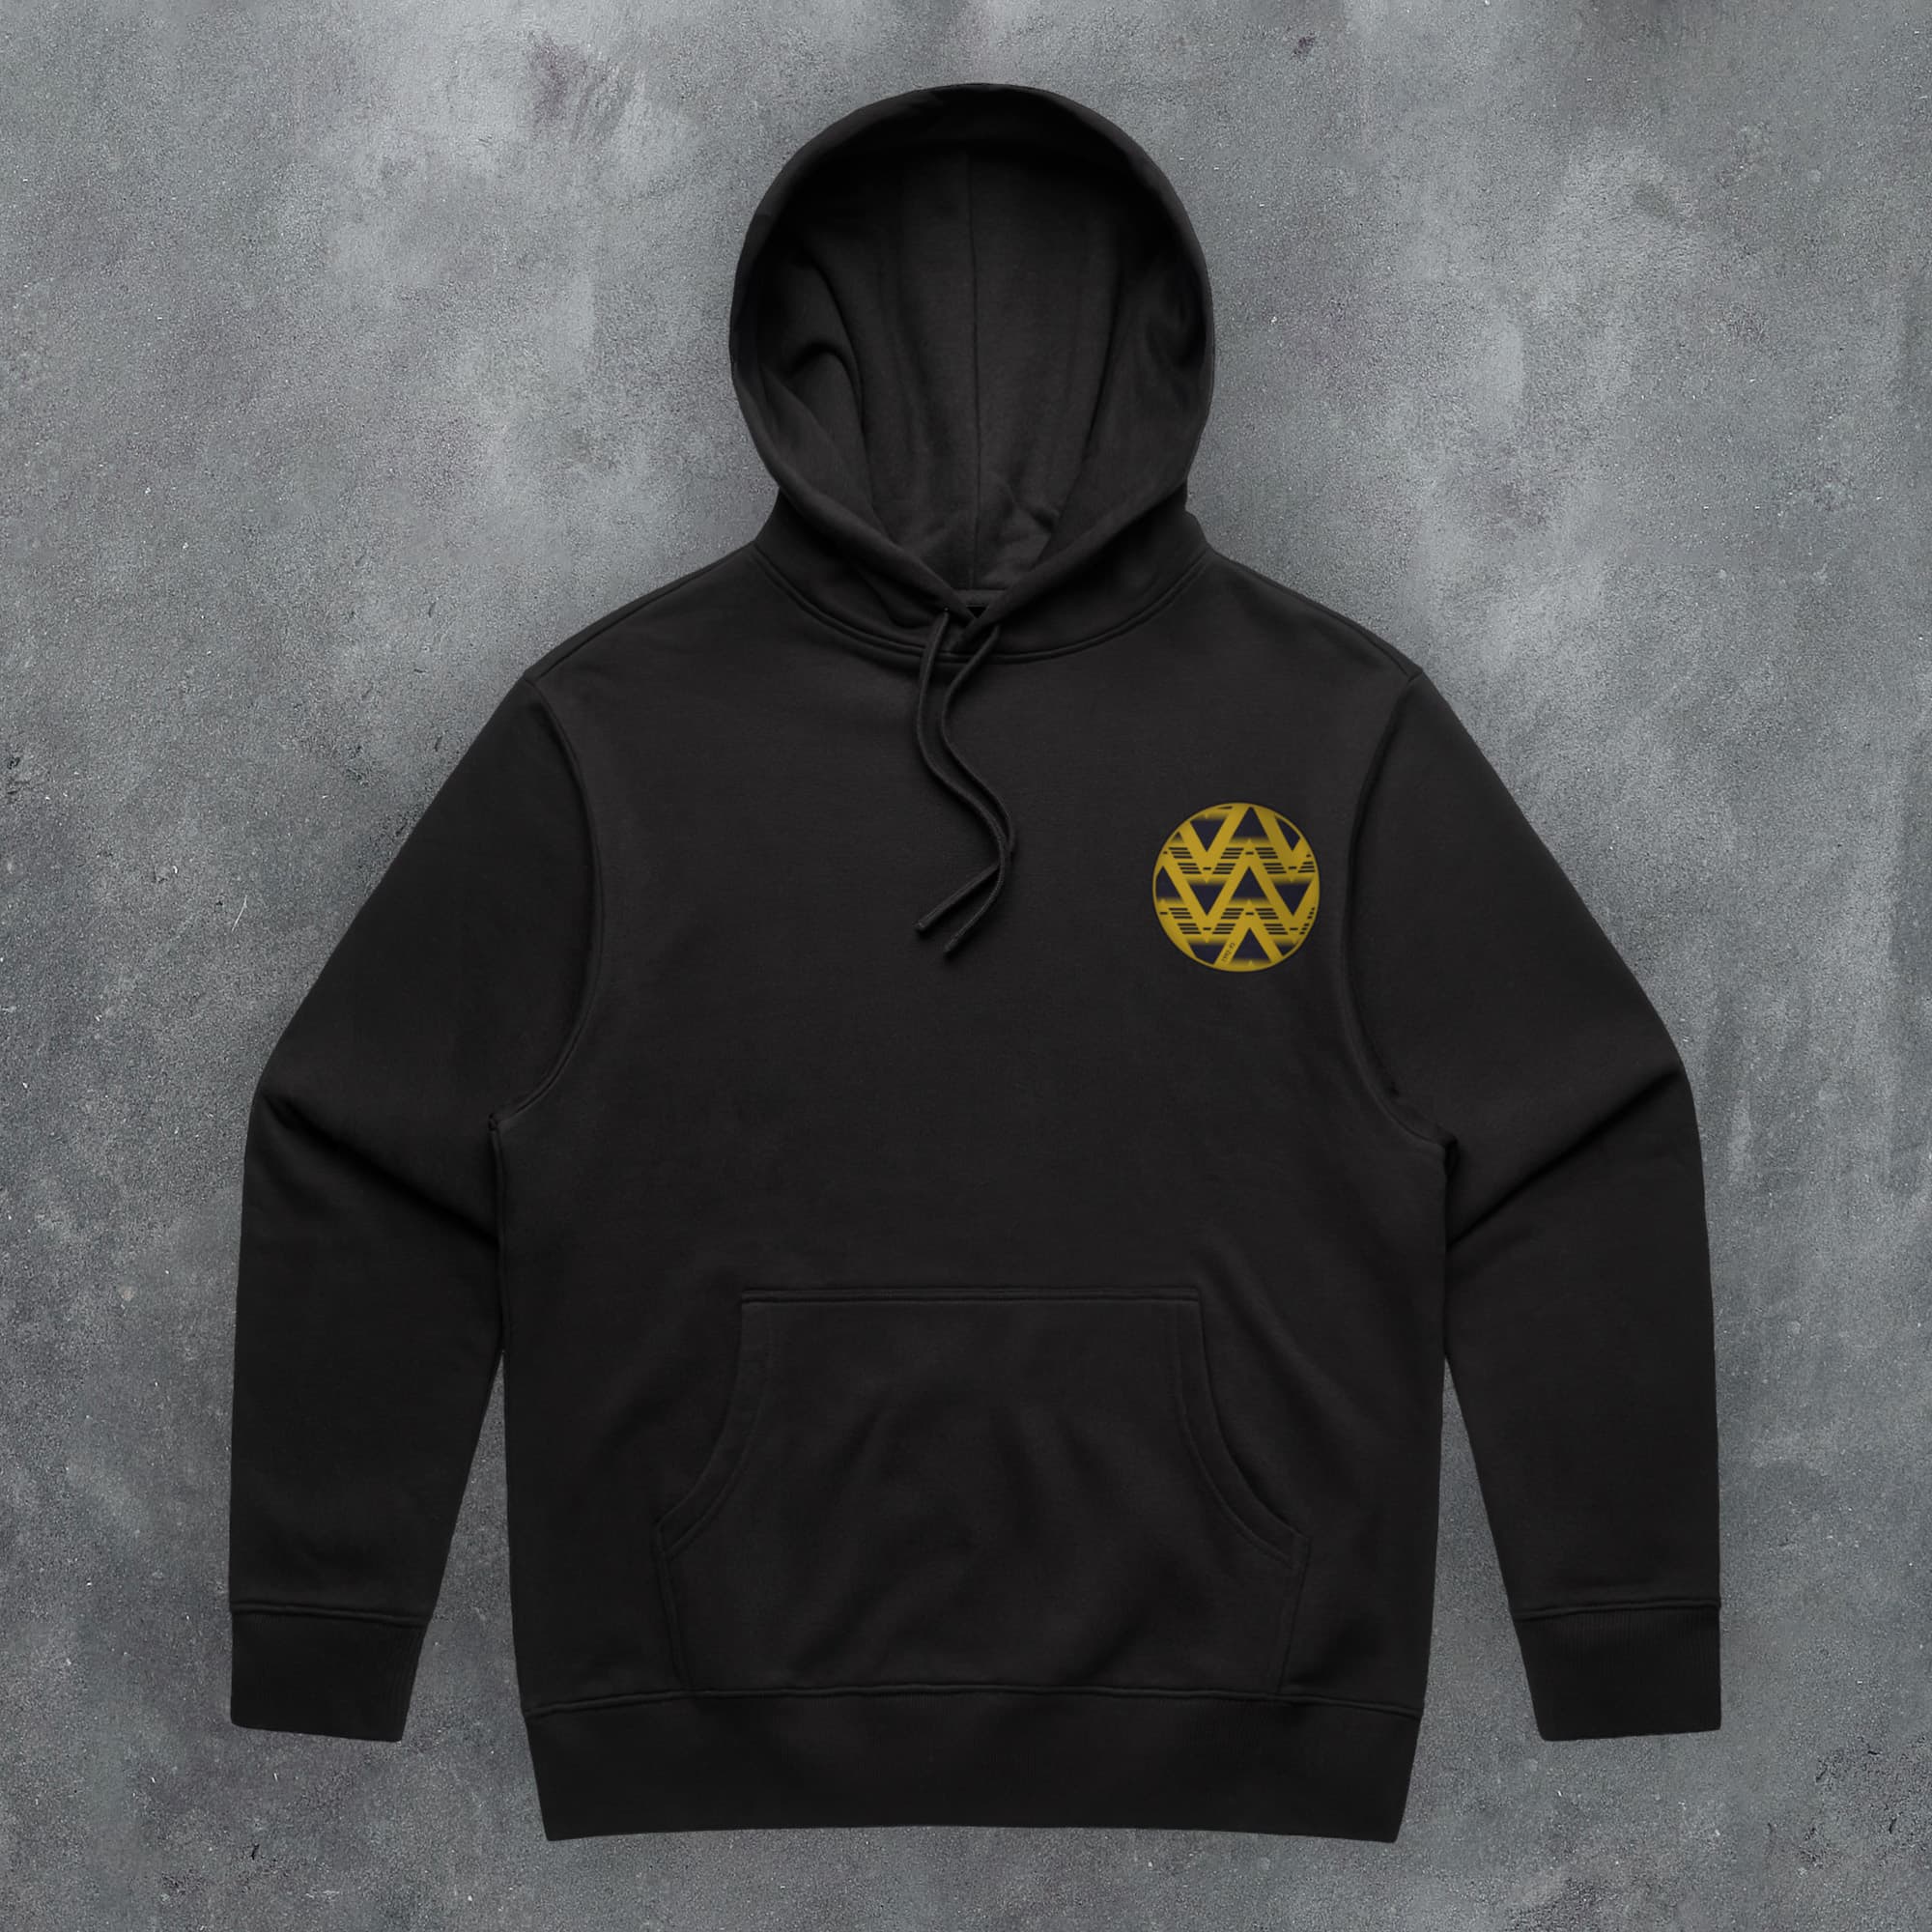 a black hoodie with a gold logo on it